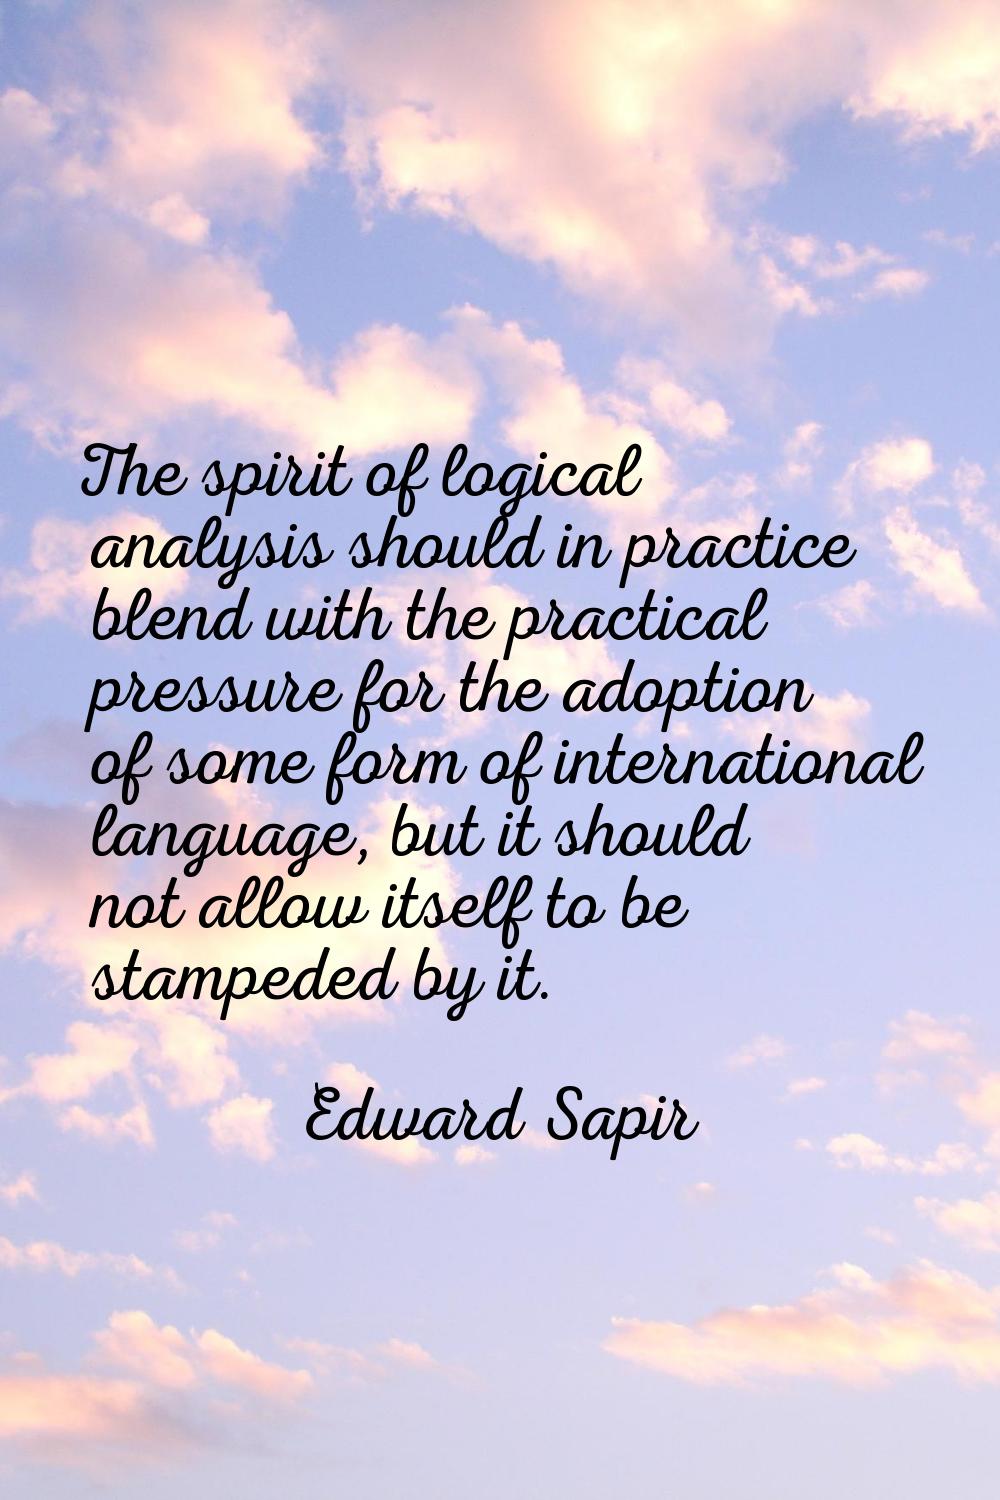 The spirit of logical analysis should in practice blend with the practical pressure for the adoptio